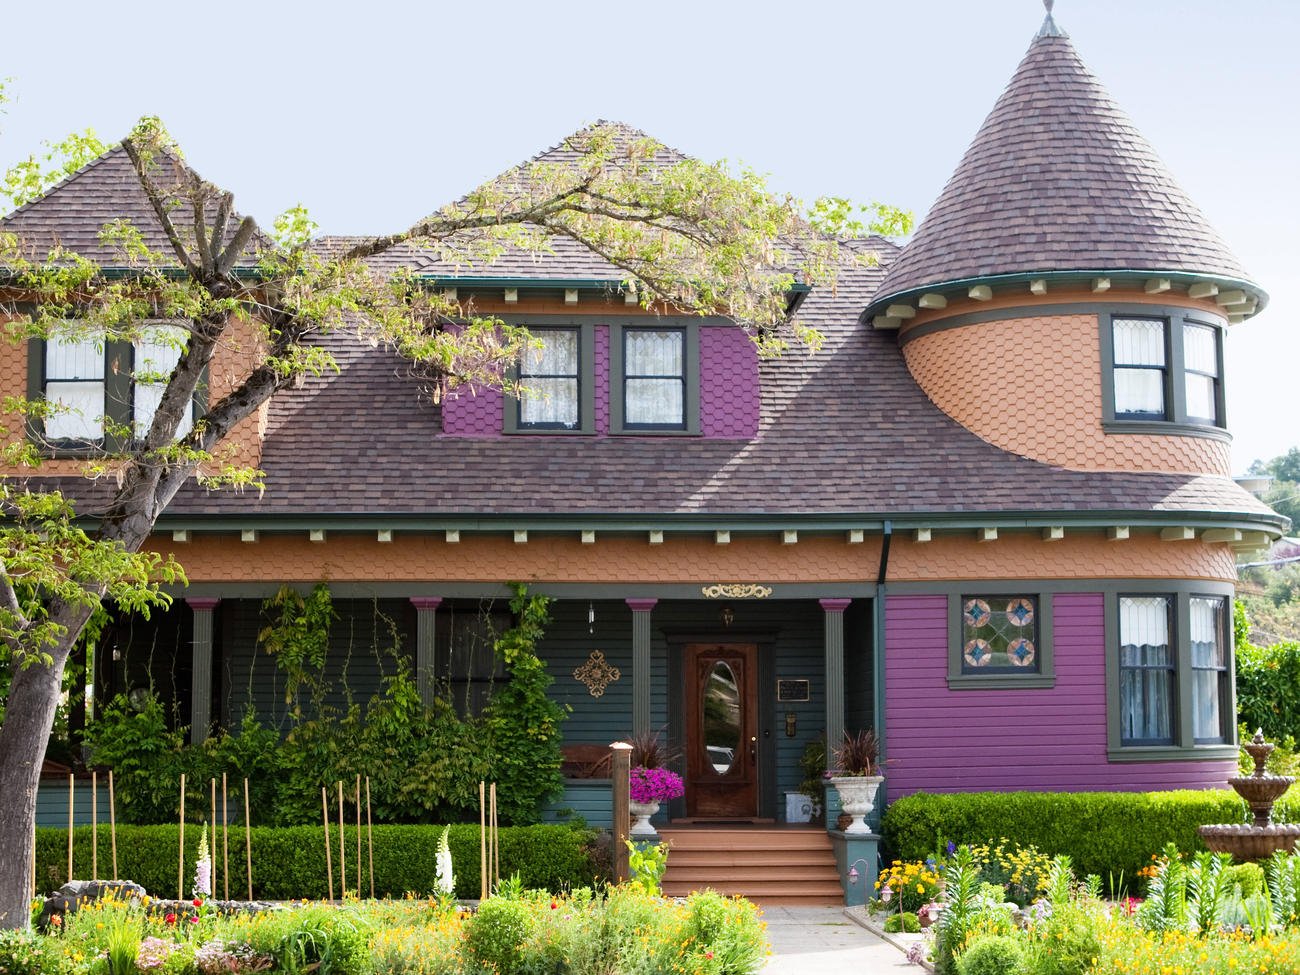 Queen Anne Victorian Houses Are the Classic Haunted House Prototype. Ever Wonder Why?